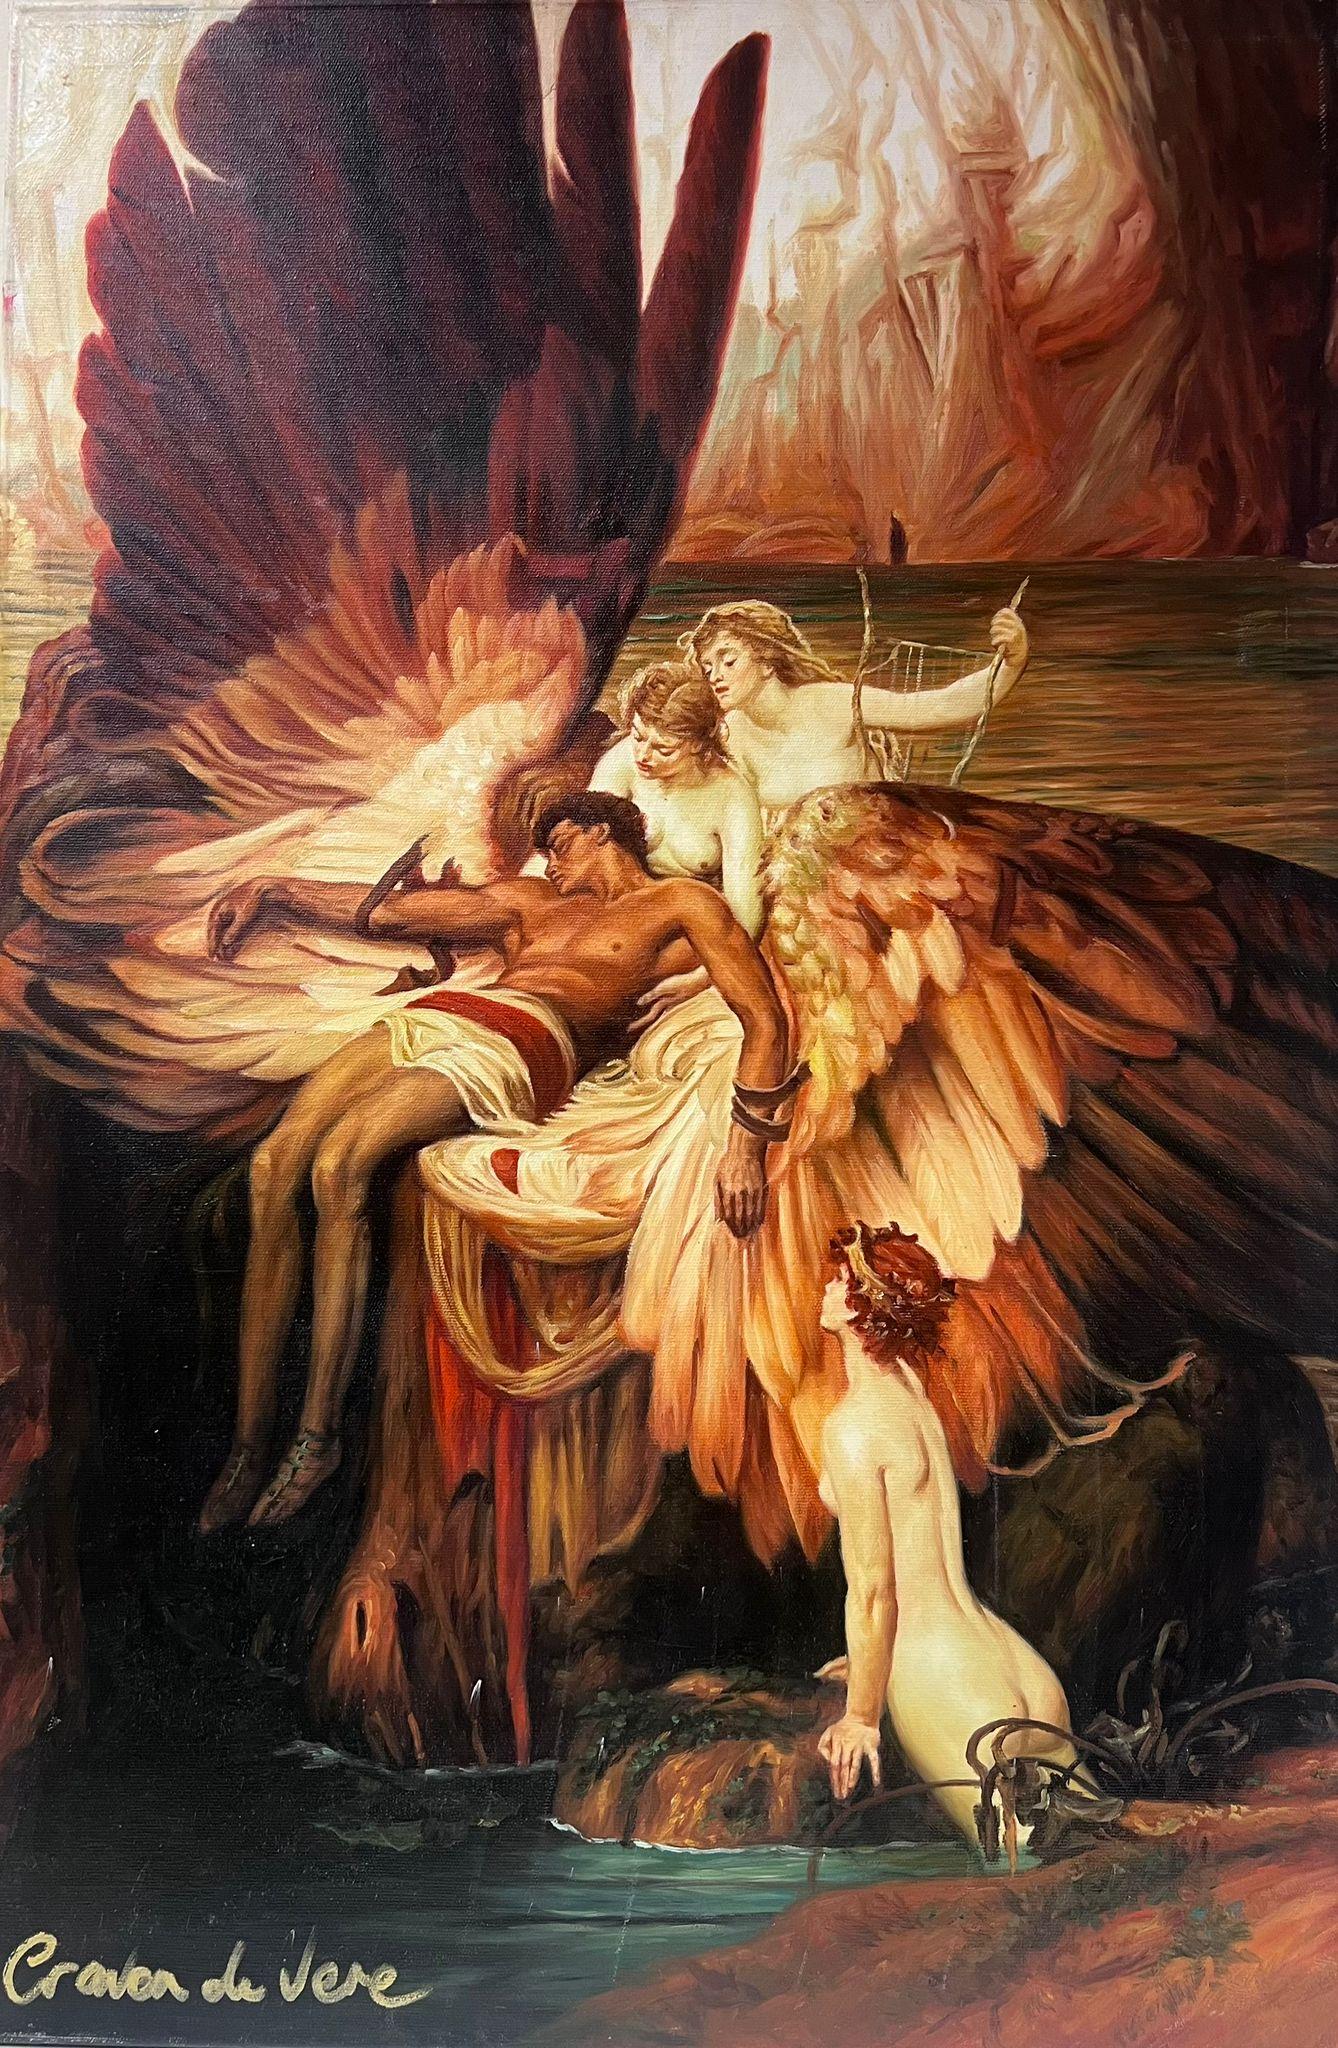 after Herbert James Draper Figurative Painting - The Lament of Icarus Large Signed Oil Painting on Canvas Mythological Nudes